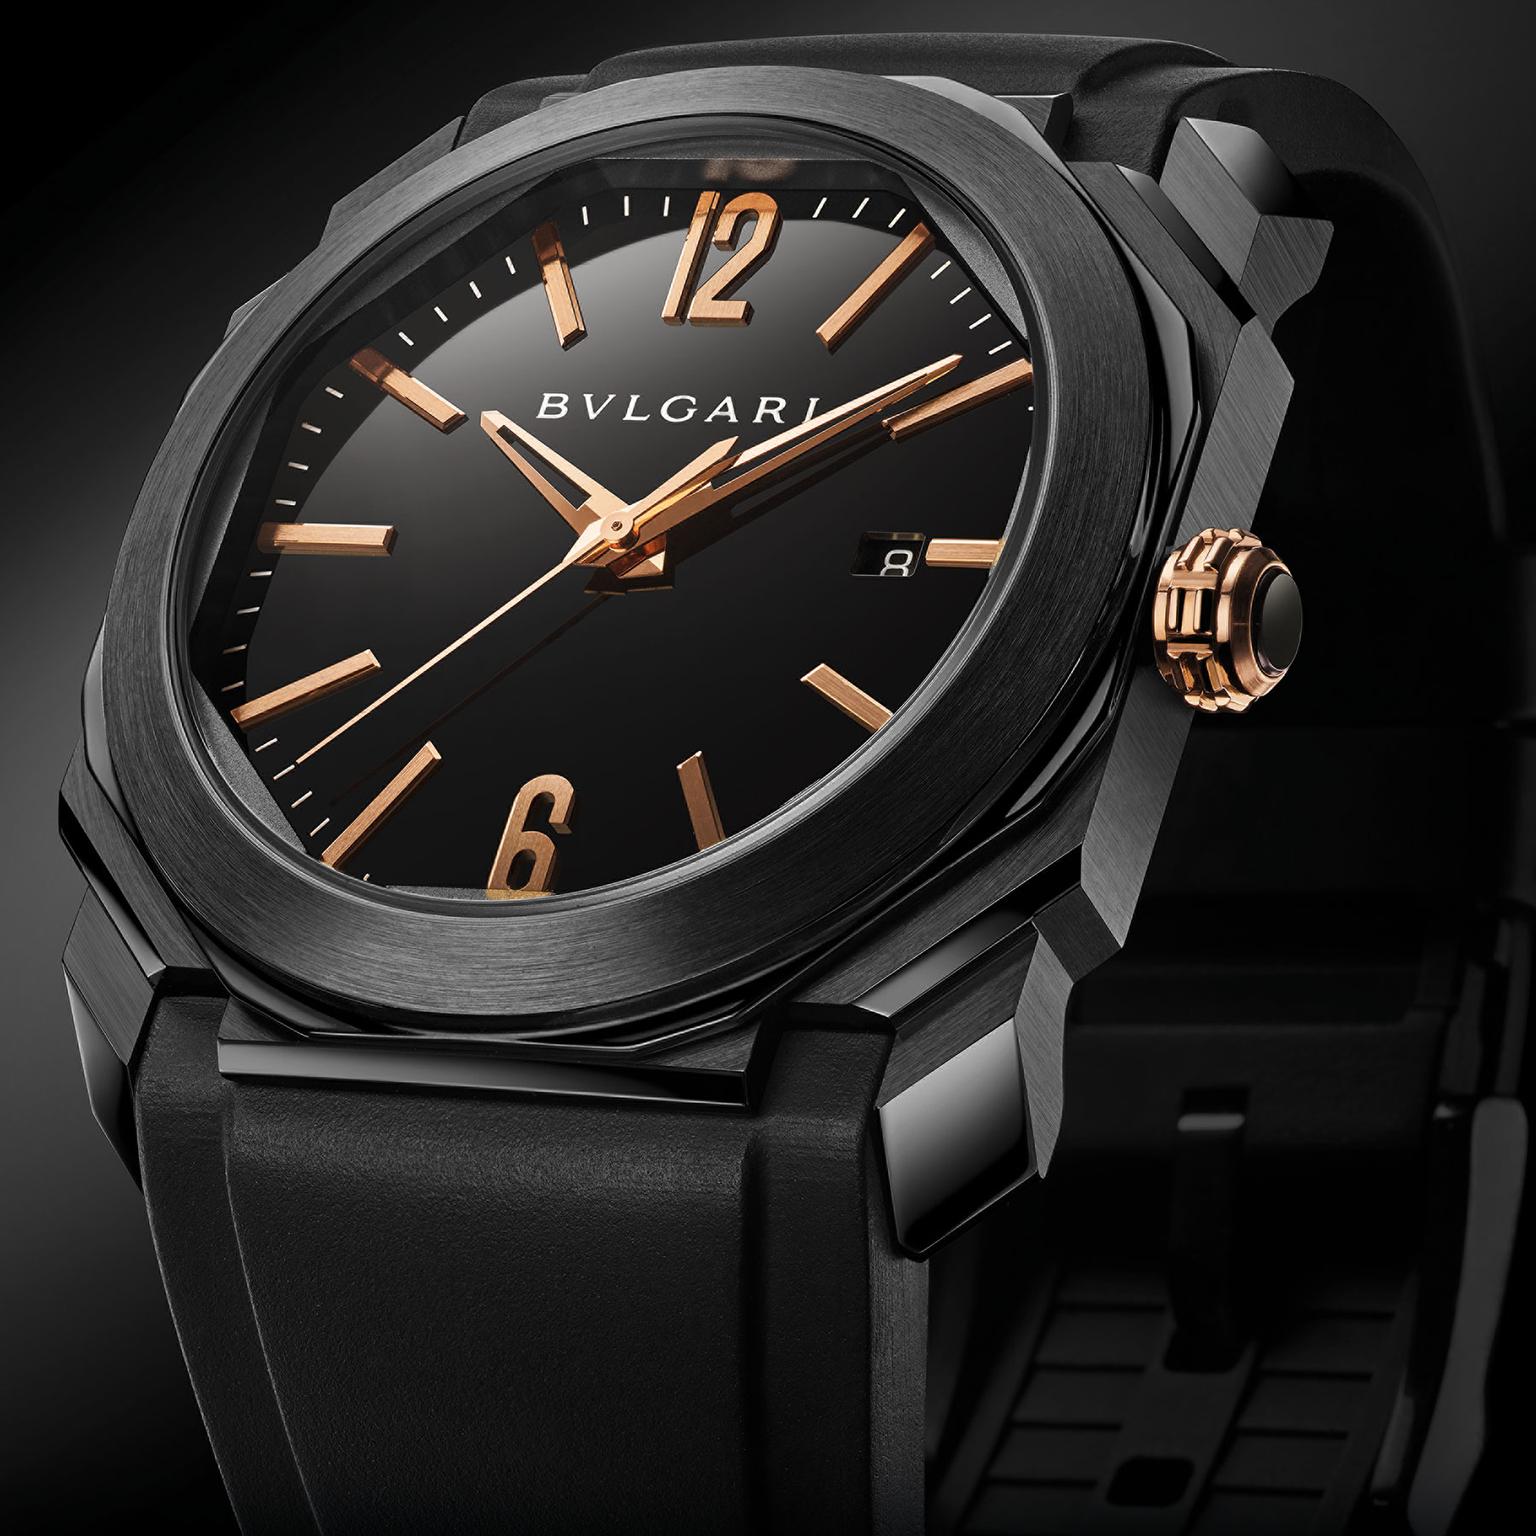 The All Black men's watches from Hublot 